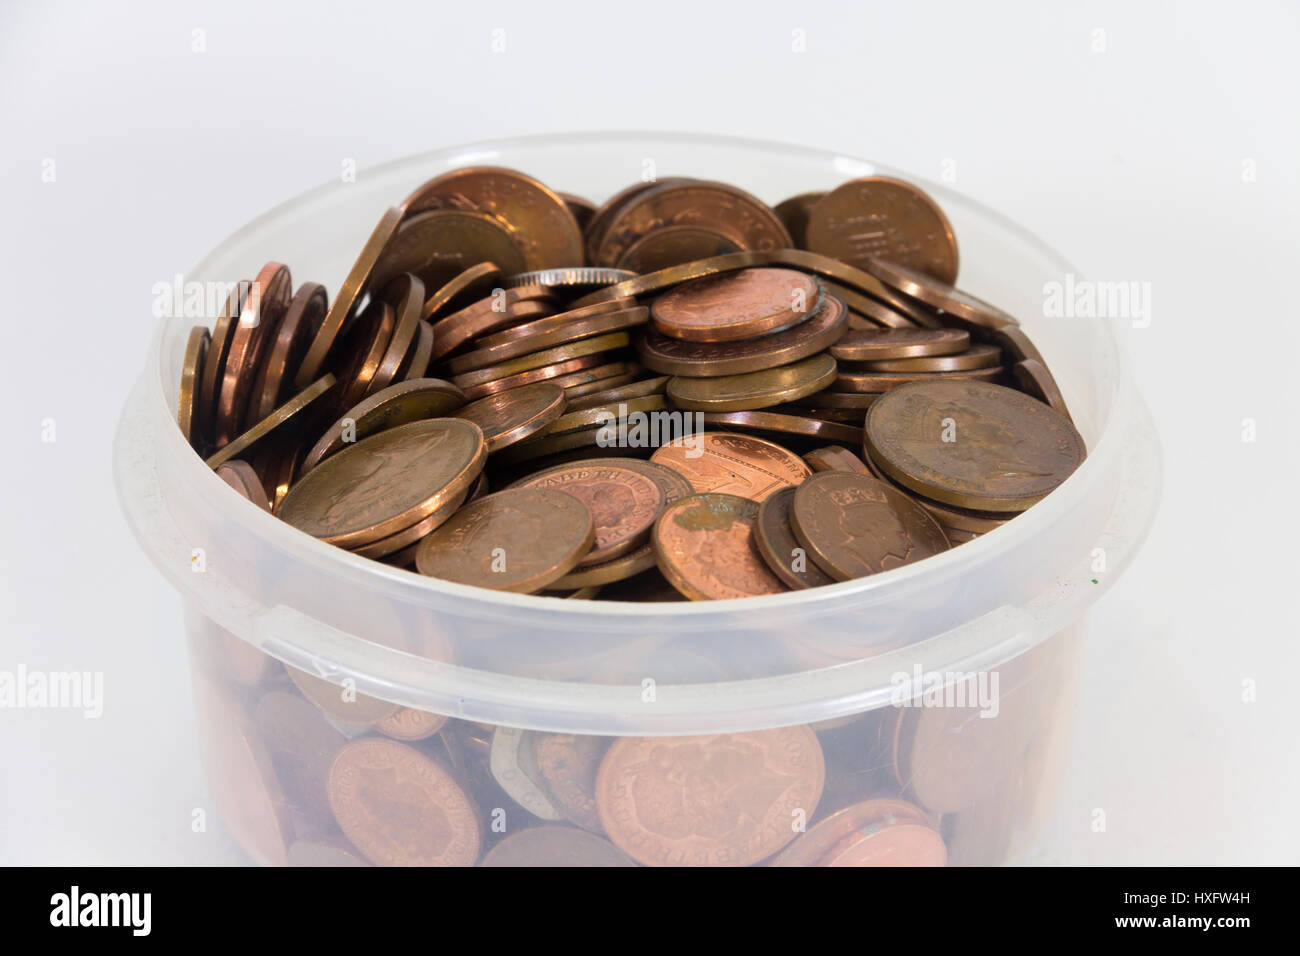 Quantity of UK coins, mostly copper one pence and two pence pieces, in a plastic tub. Stock Photo